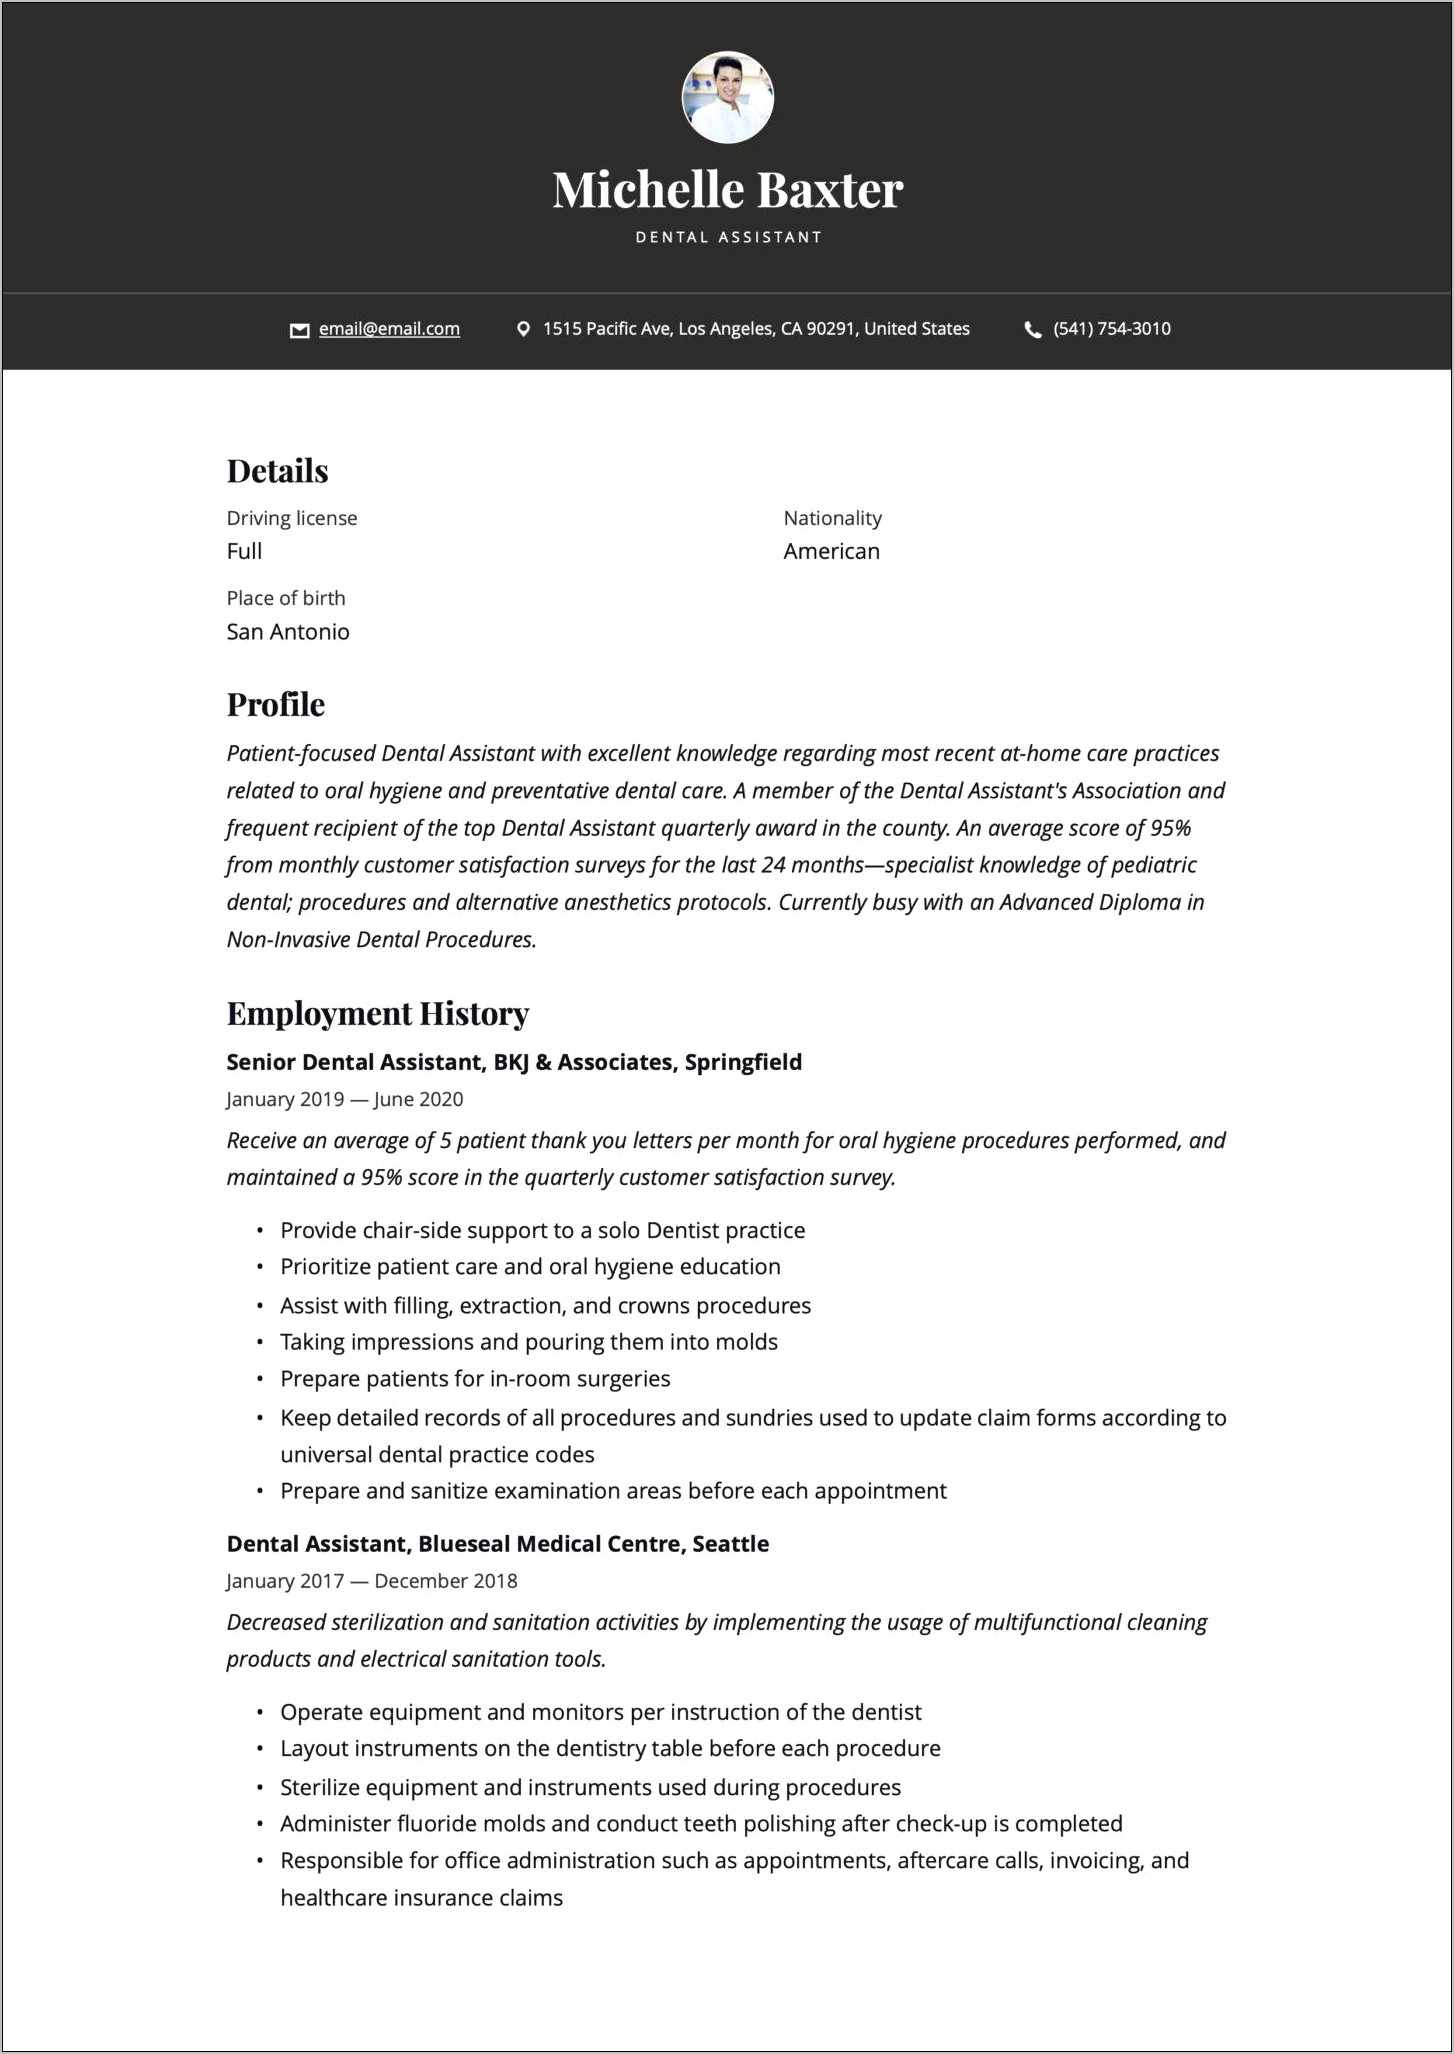 Resume For Apply Job As Dental Assistant